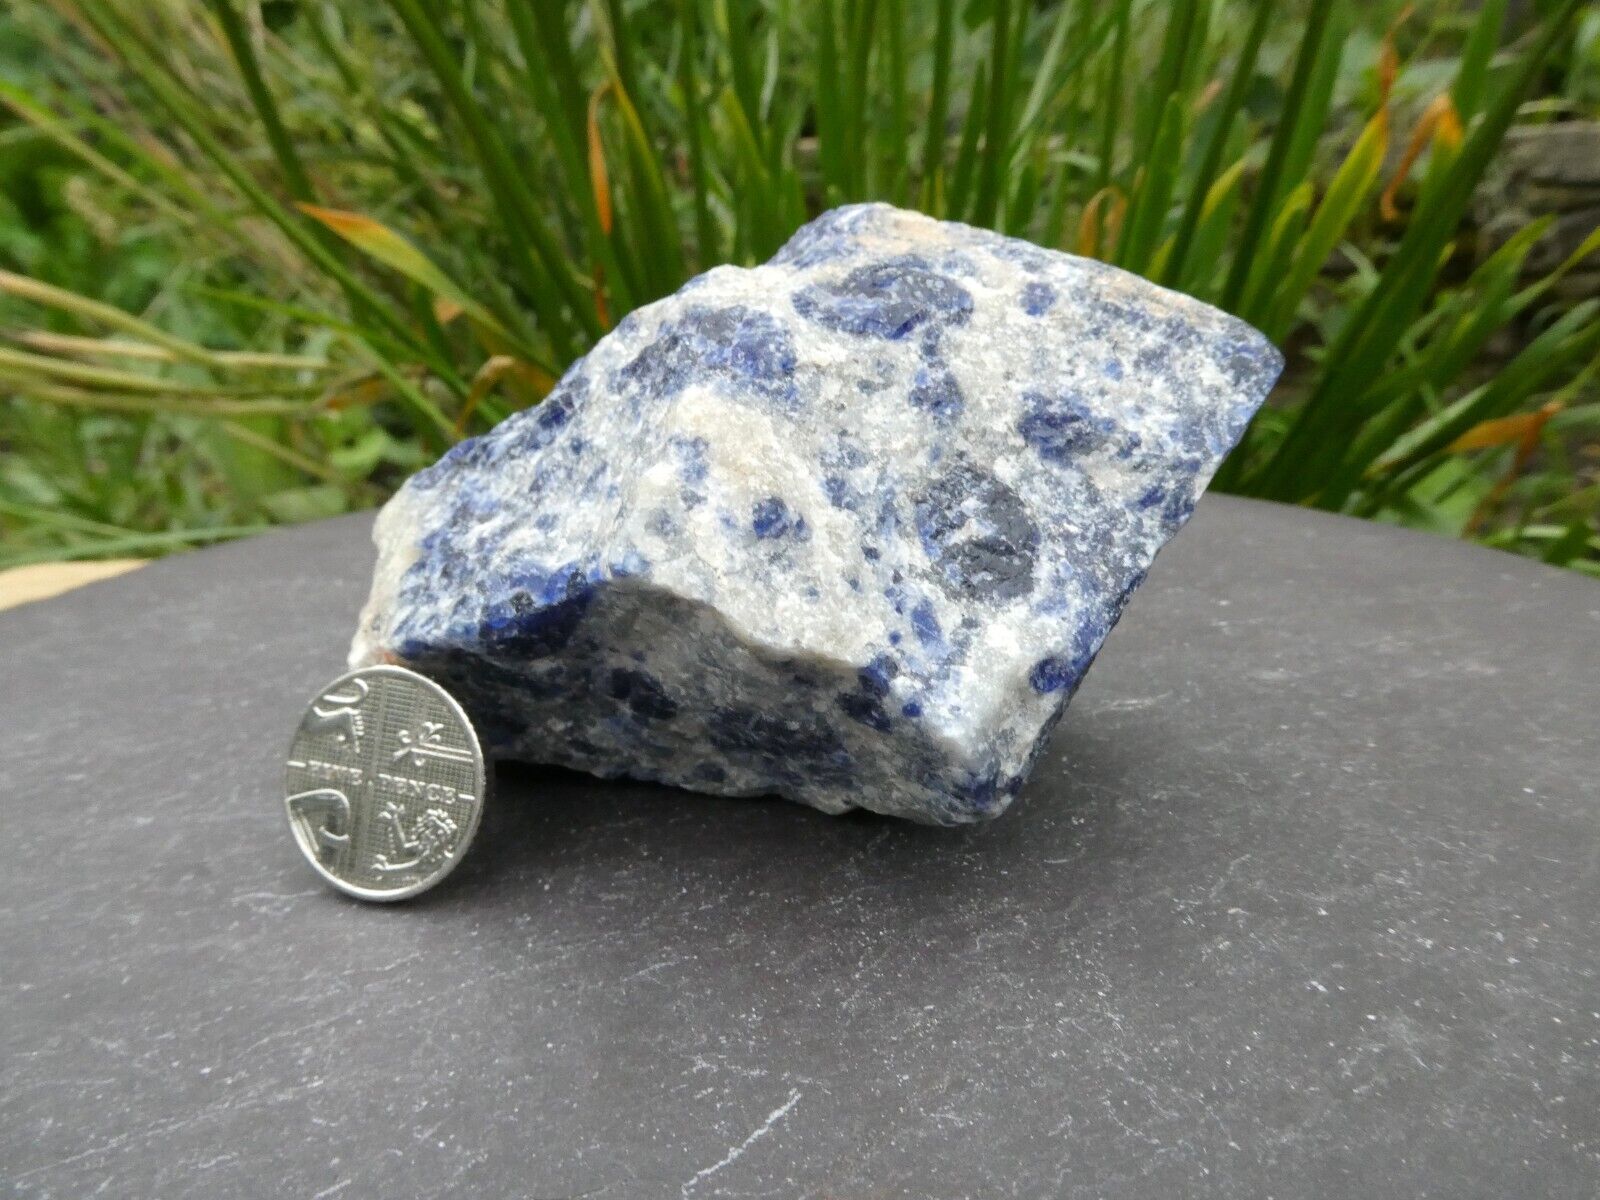 Large Chunky Sodalite Crystal Rough Rock Specimen  87mm x 60mm  Weight 220g